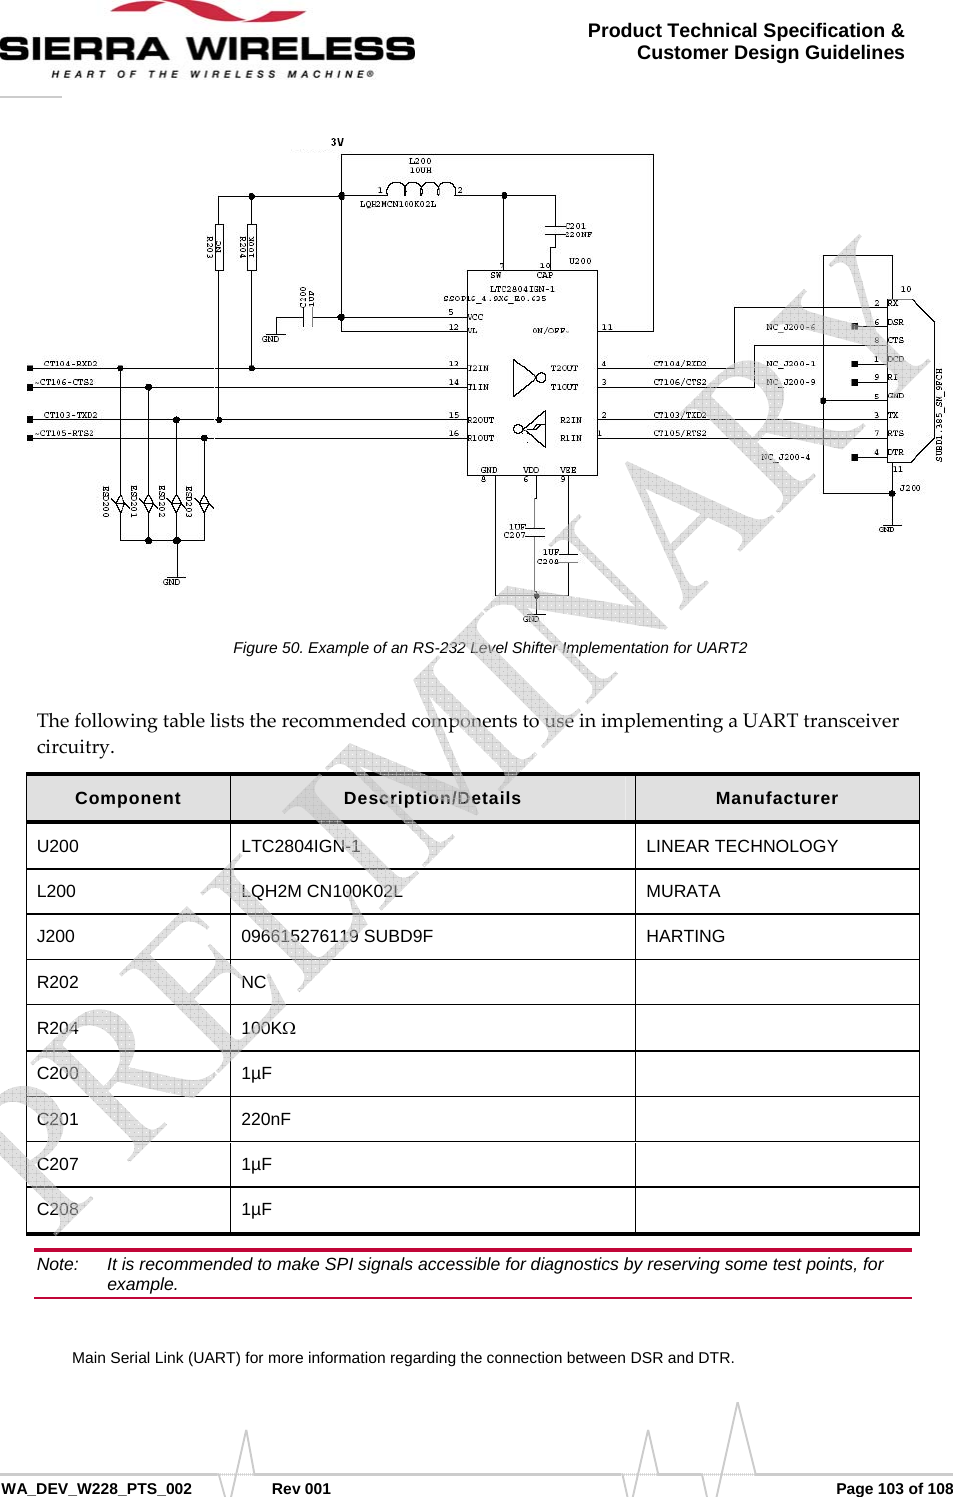      WA_DEV_W228_PTS_002 Rev 001  Page 103 of 108 Product Technical Specification &amp; Customer Design Guidelines Figure 50. Example of an RS-232 Level Shifter Implementation for UART2 ThefollowingtableliststherecommendedcomponentstouseinimplementingaUARTtransceivercircuitry.Component  Description/Details  Manufacturer U200 LTC2804IGN-1  LINEAR TECHNOLOGY L200 LQH2M CN100K02L  MURATA J200 096615276119 SUBD9F  HARTING R202 NC   R204  100KΩ  C200 1µF   C201 220nF   C207 1µF   C208 1µF   Note:   It is recommended to make SPI signals accessible for diagnostics by reserving some test points, for example. Main Serial Link (UART) for more information regarding the connection between DSR and DTR.    